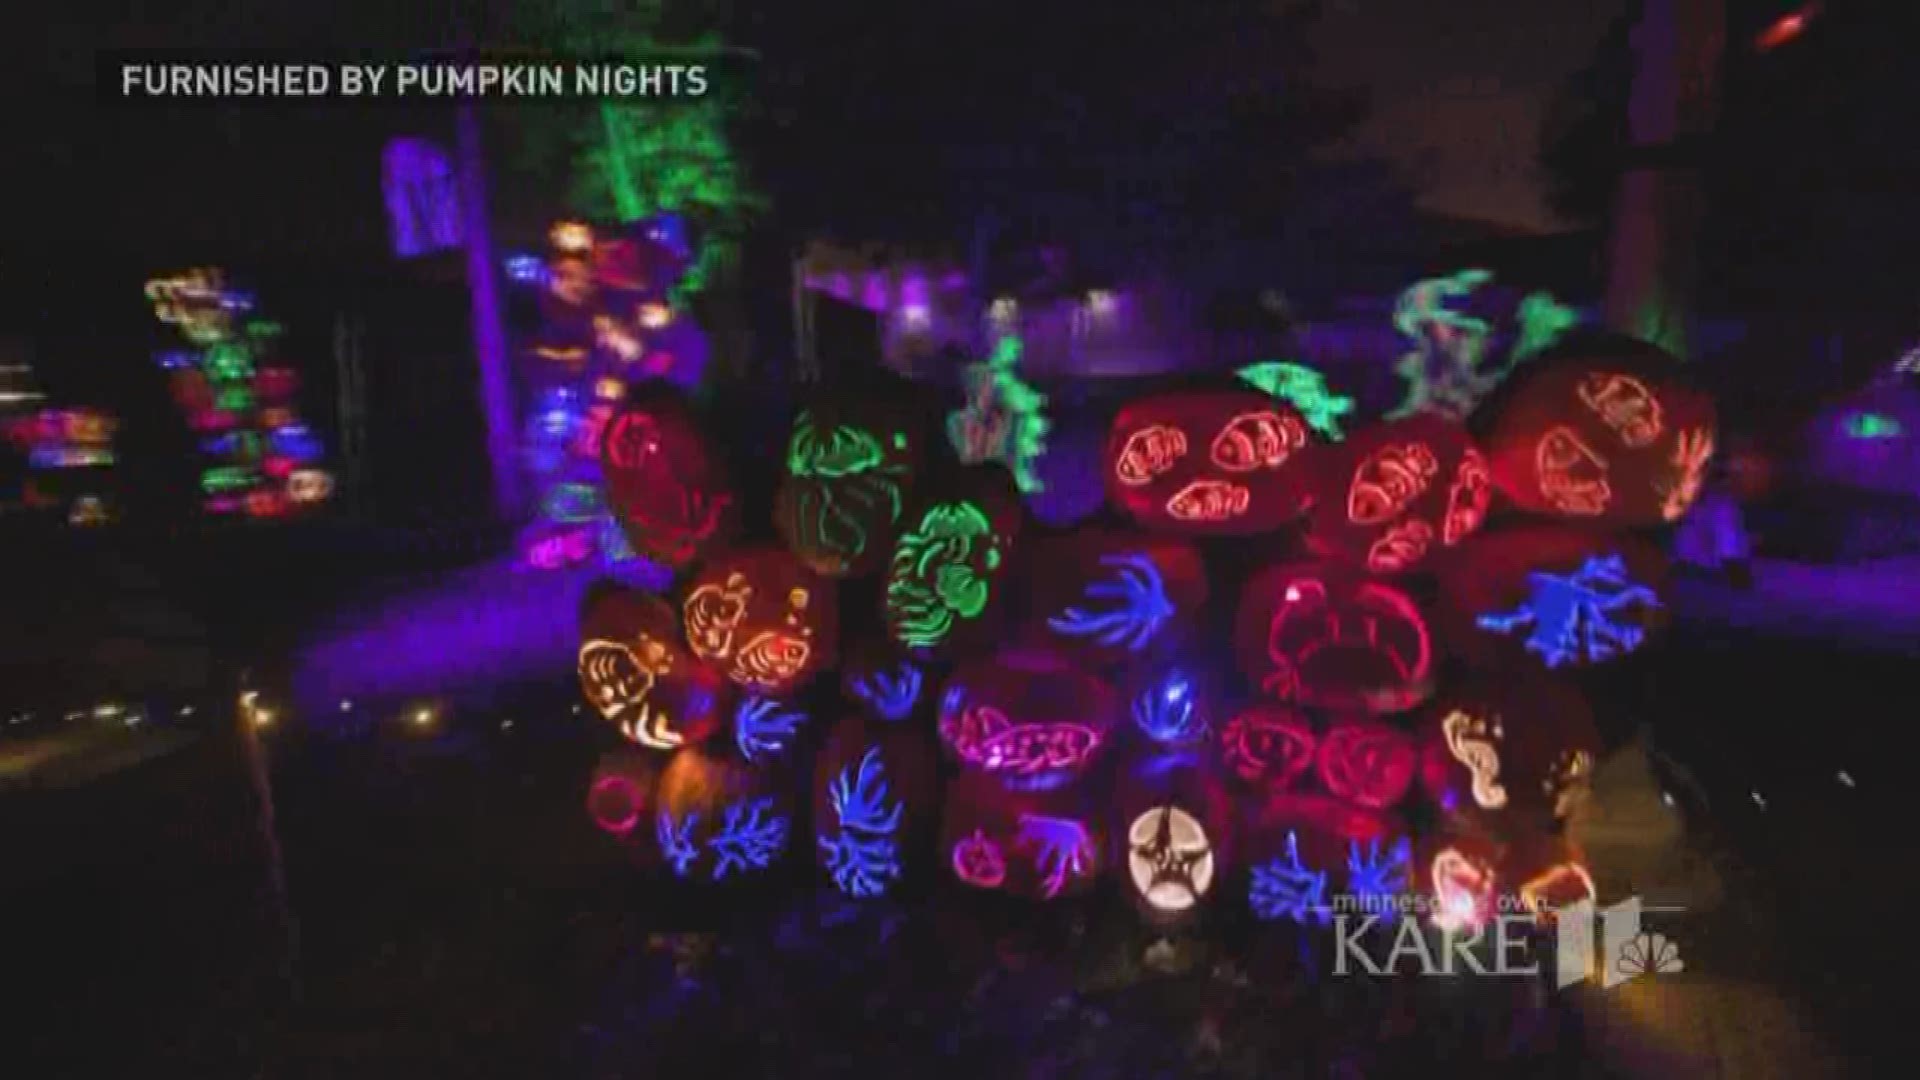 Coming back for its second year, Pumpkin Nights is a Halloween display that families of all ages can enjoy. Ryan Lisson explains the work that goes into this amazing display.